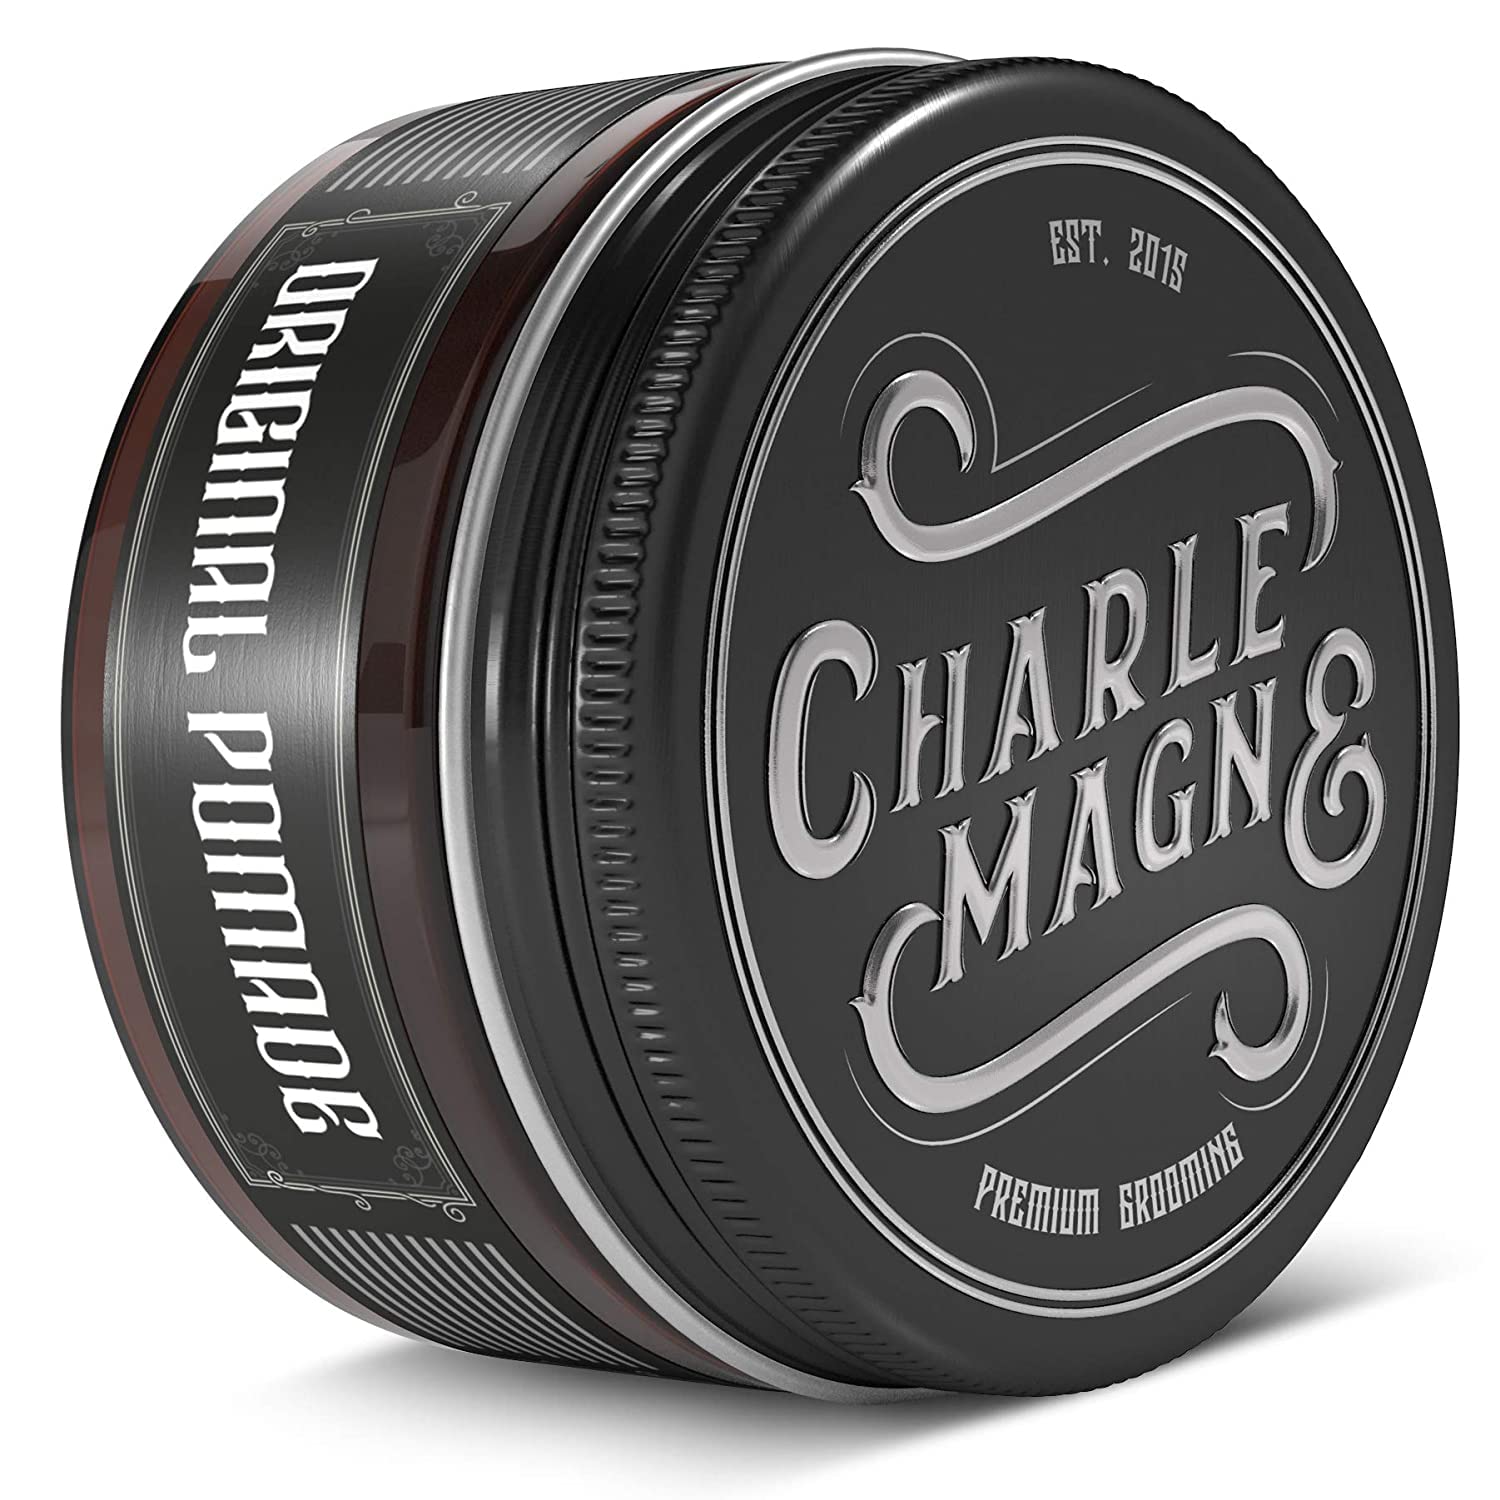 Charlemagne Original Pomade, Water-Based Pomade for Men, Perfect & Strong Hold, Elegant Scent, Perfect Shine, Barbershop Hair Pomade, 100 ml